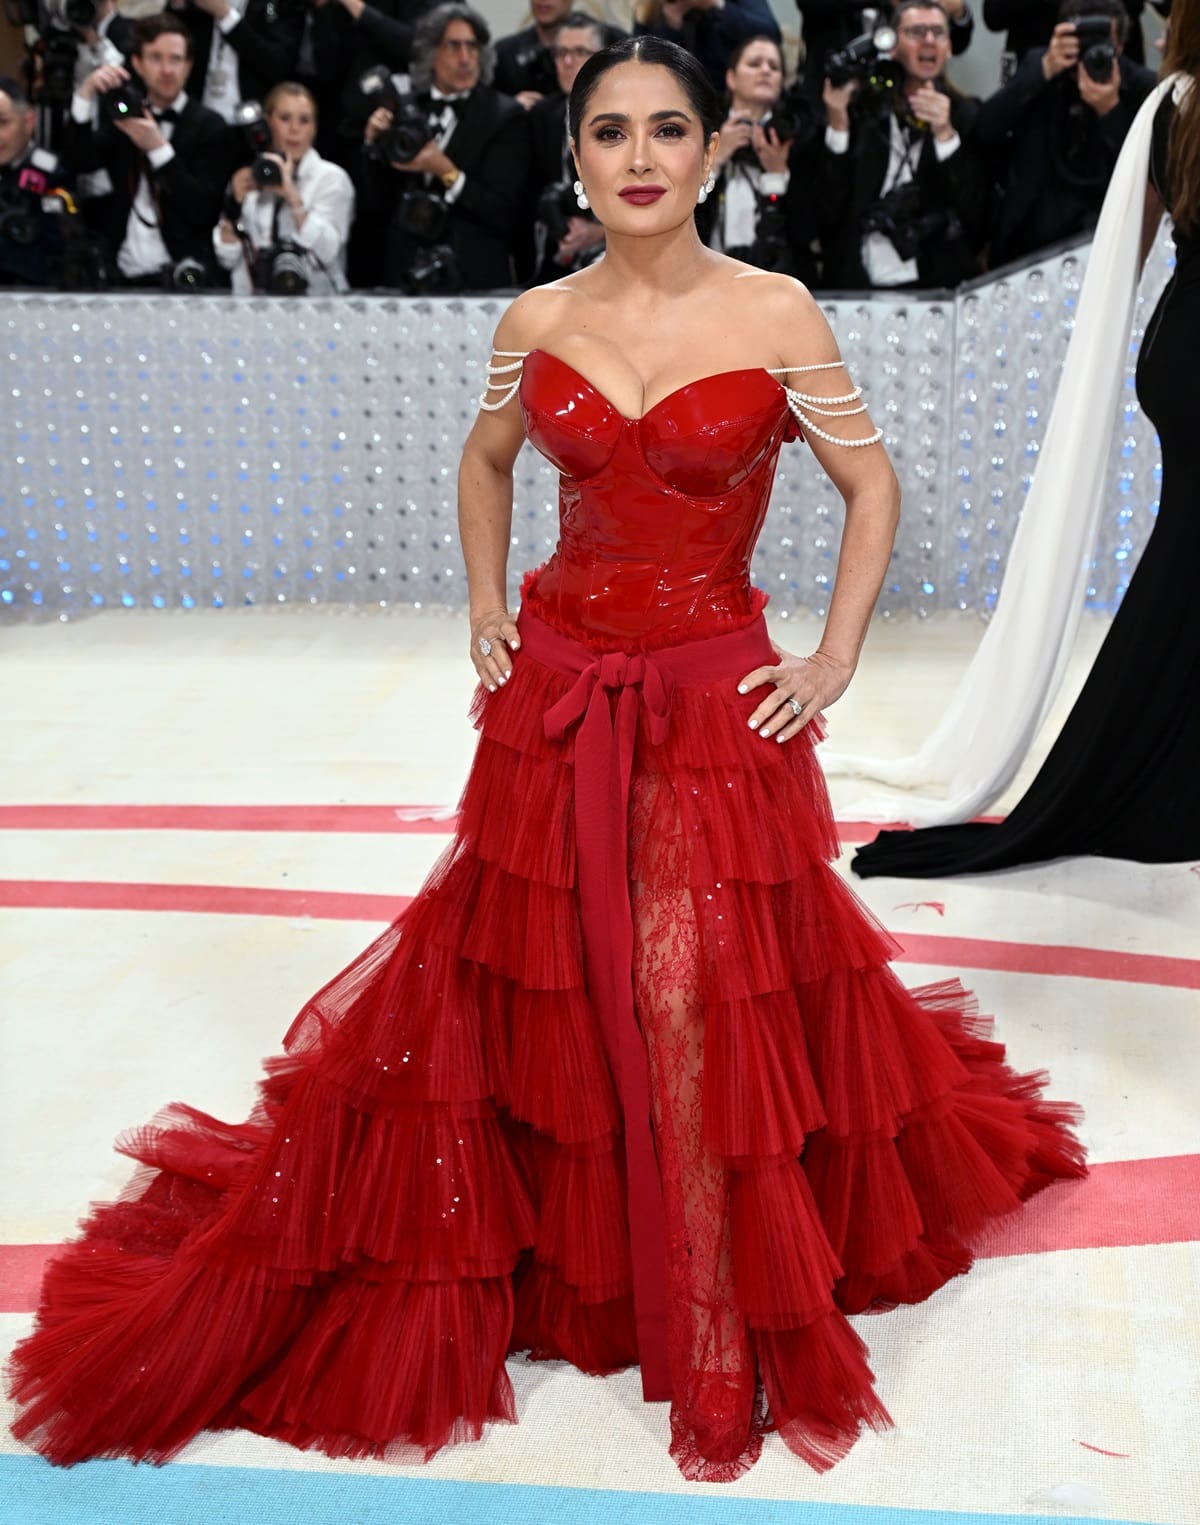 Salma Hayek caused a sensation at the 2023 Met Gala, leaving everyone breathless with her mesmerizing Gucci ball gown in a vibrant shade of red